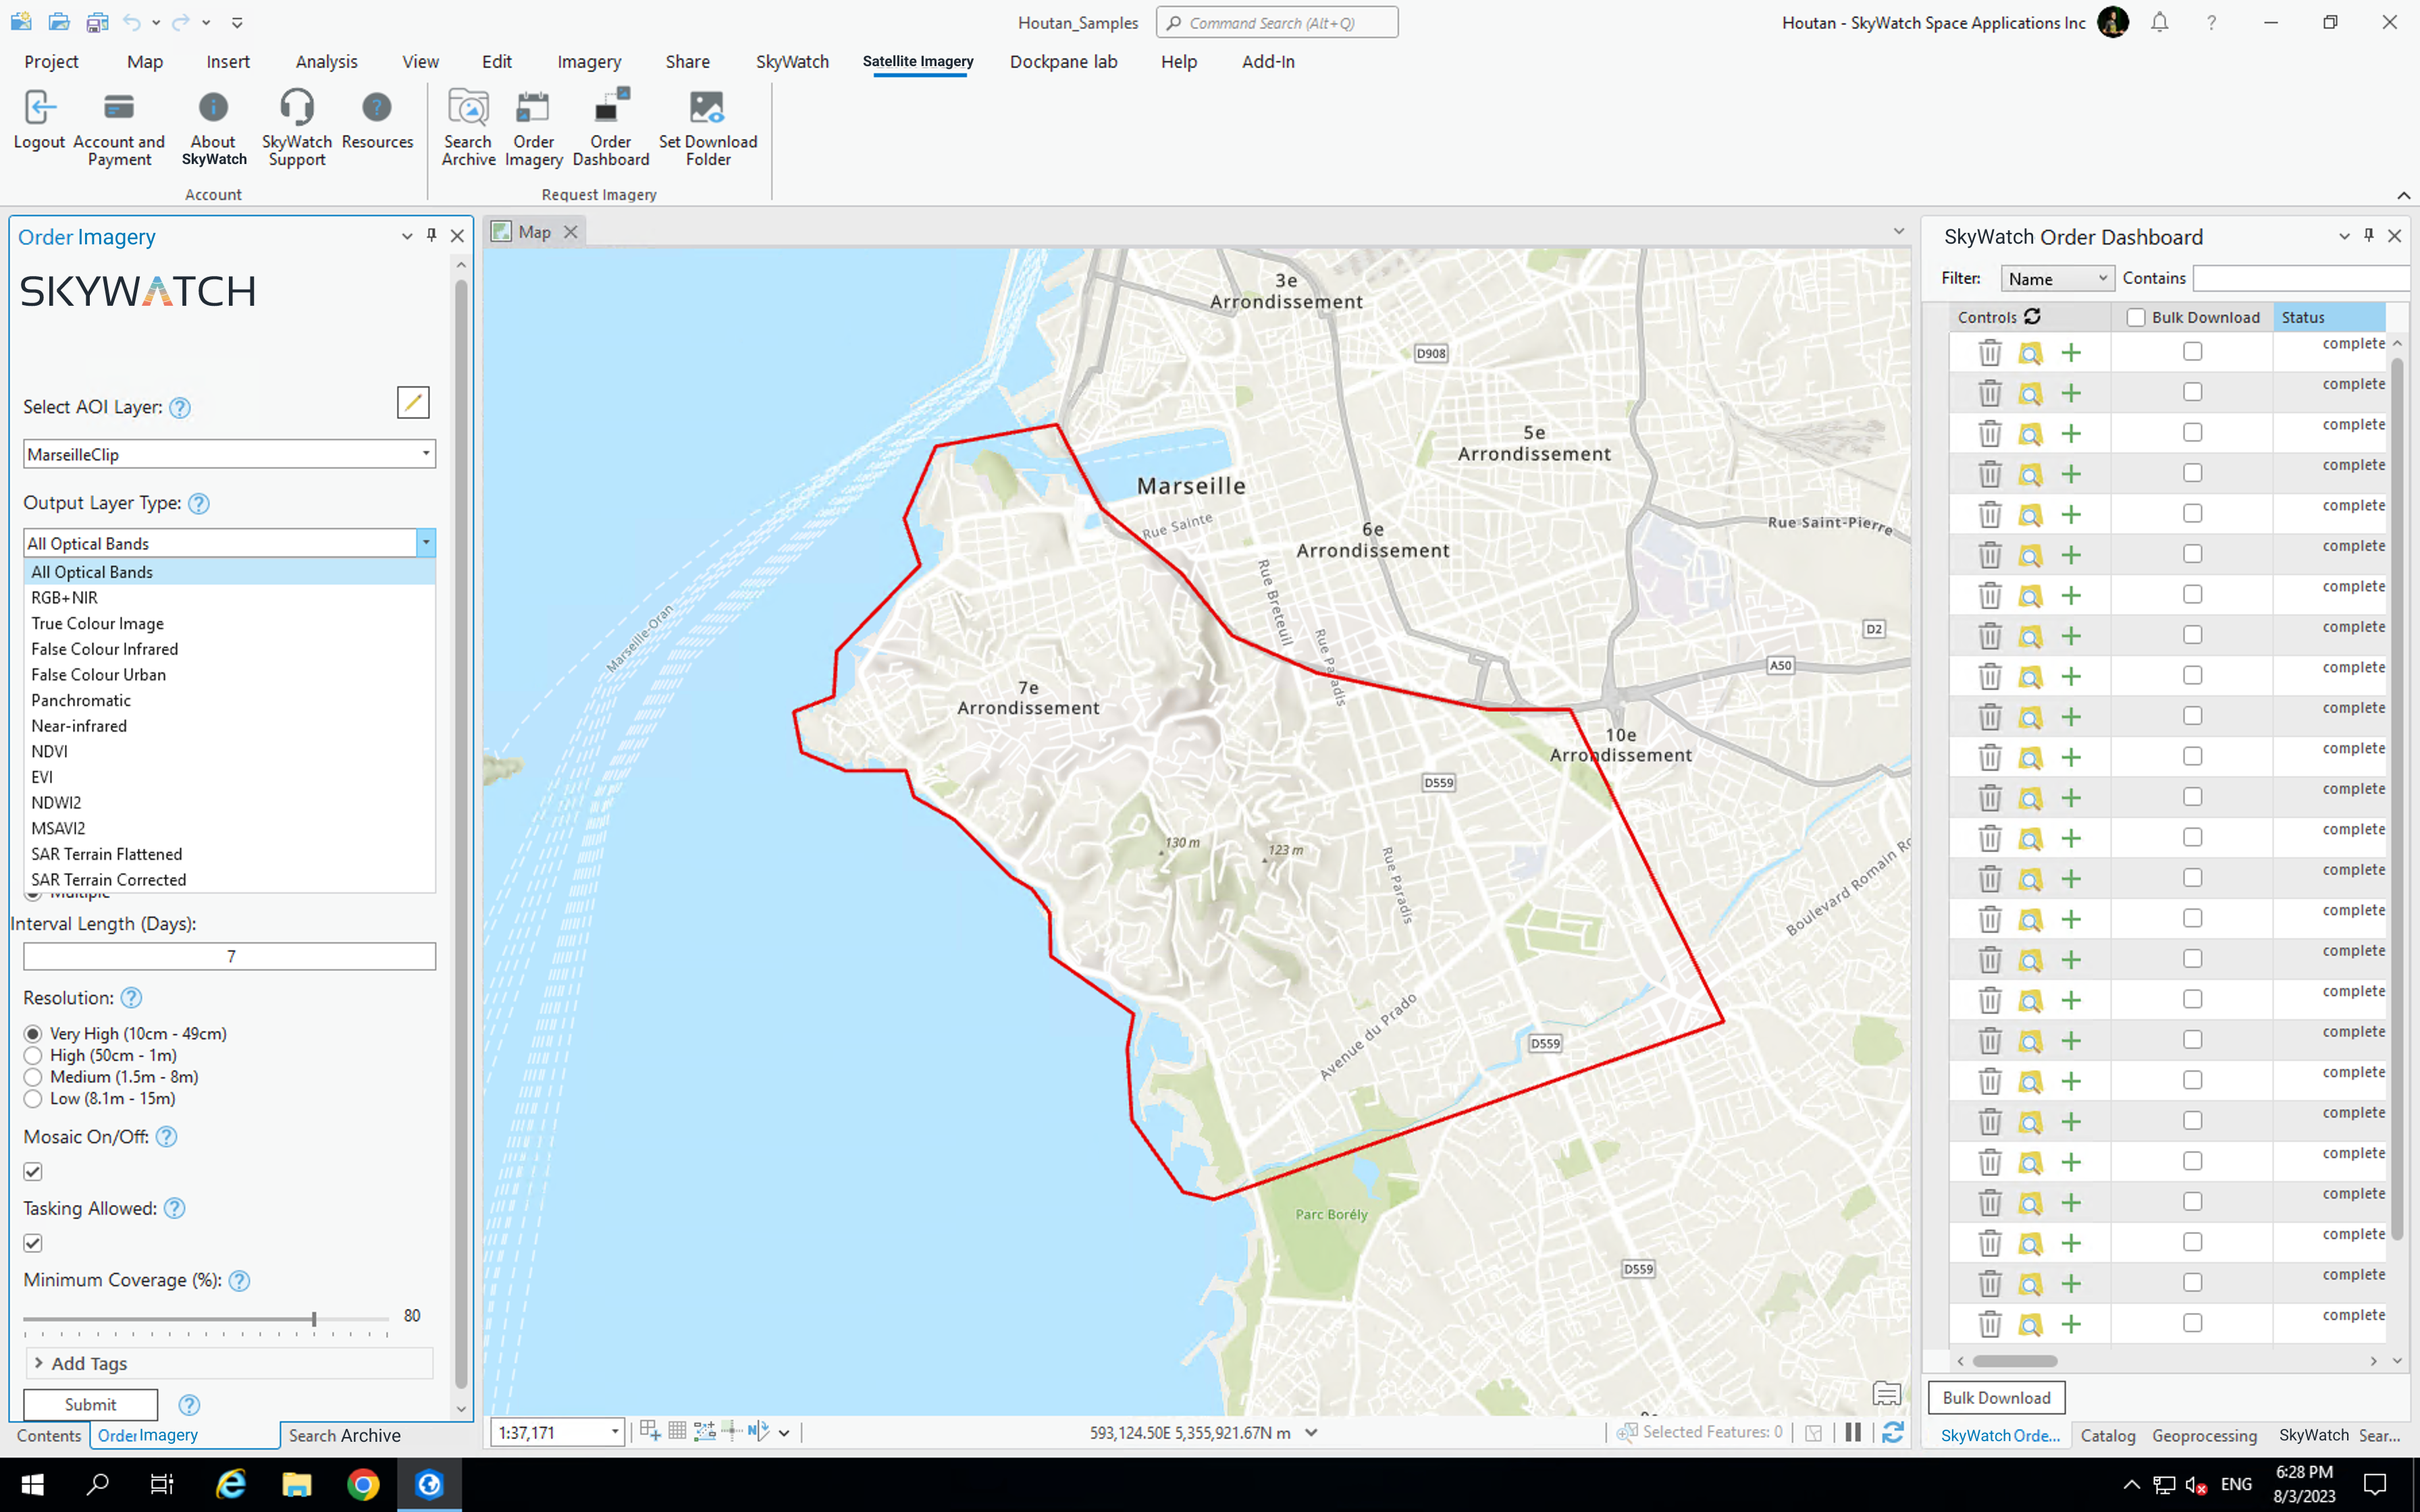 Easily task new imagery from ArcGIS